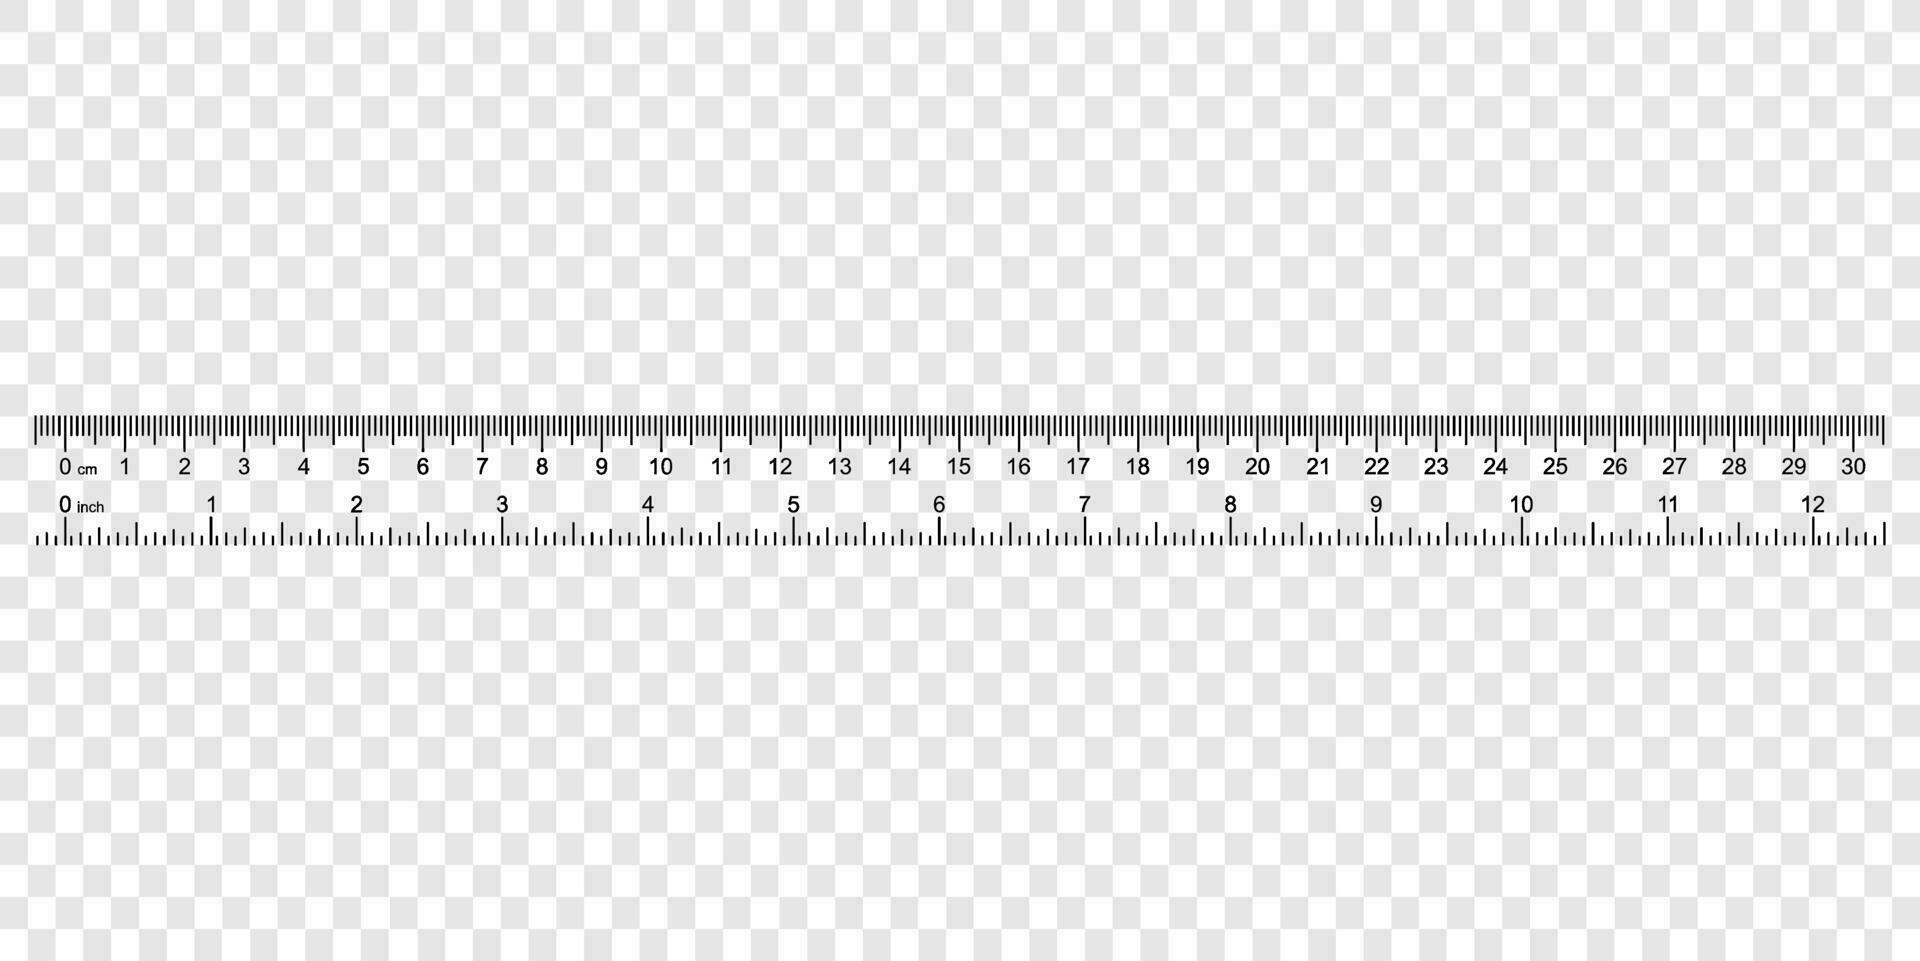 ruler with numbers for measuring length vector